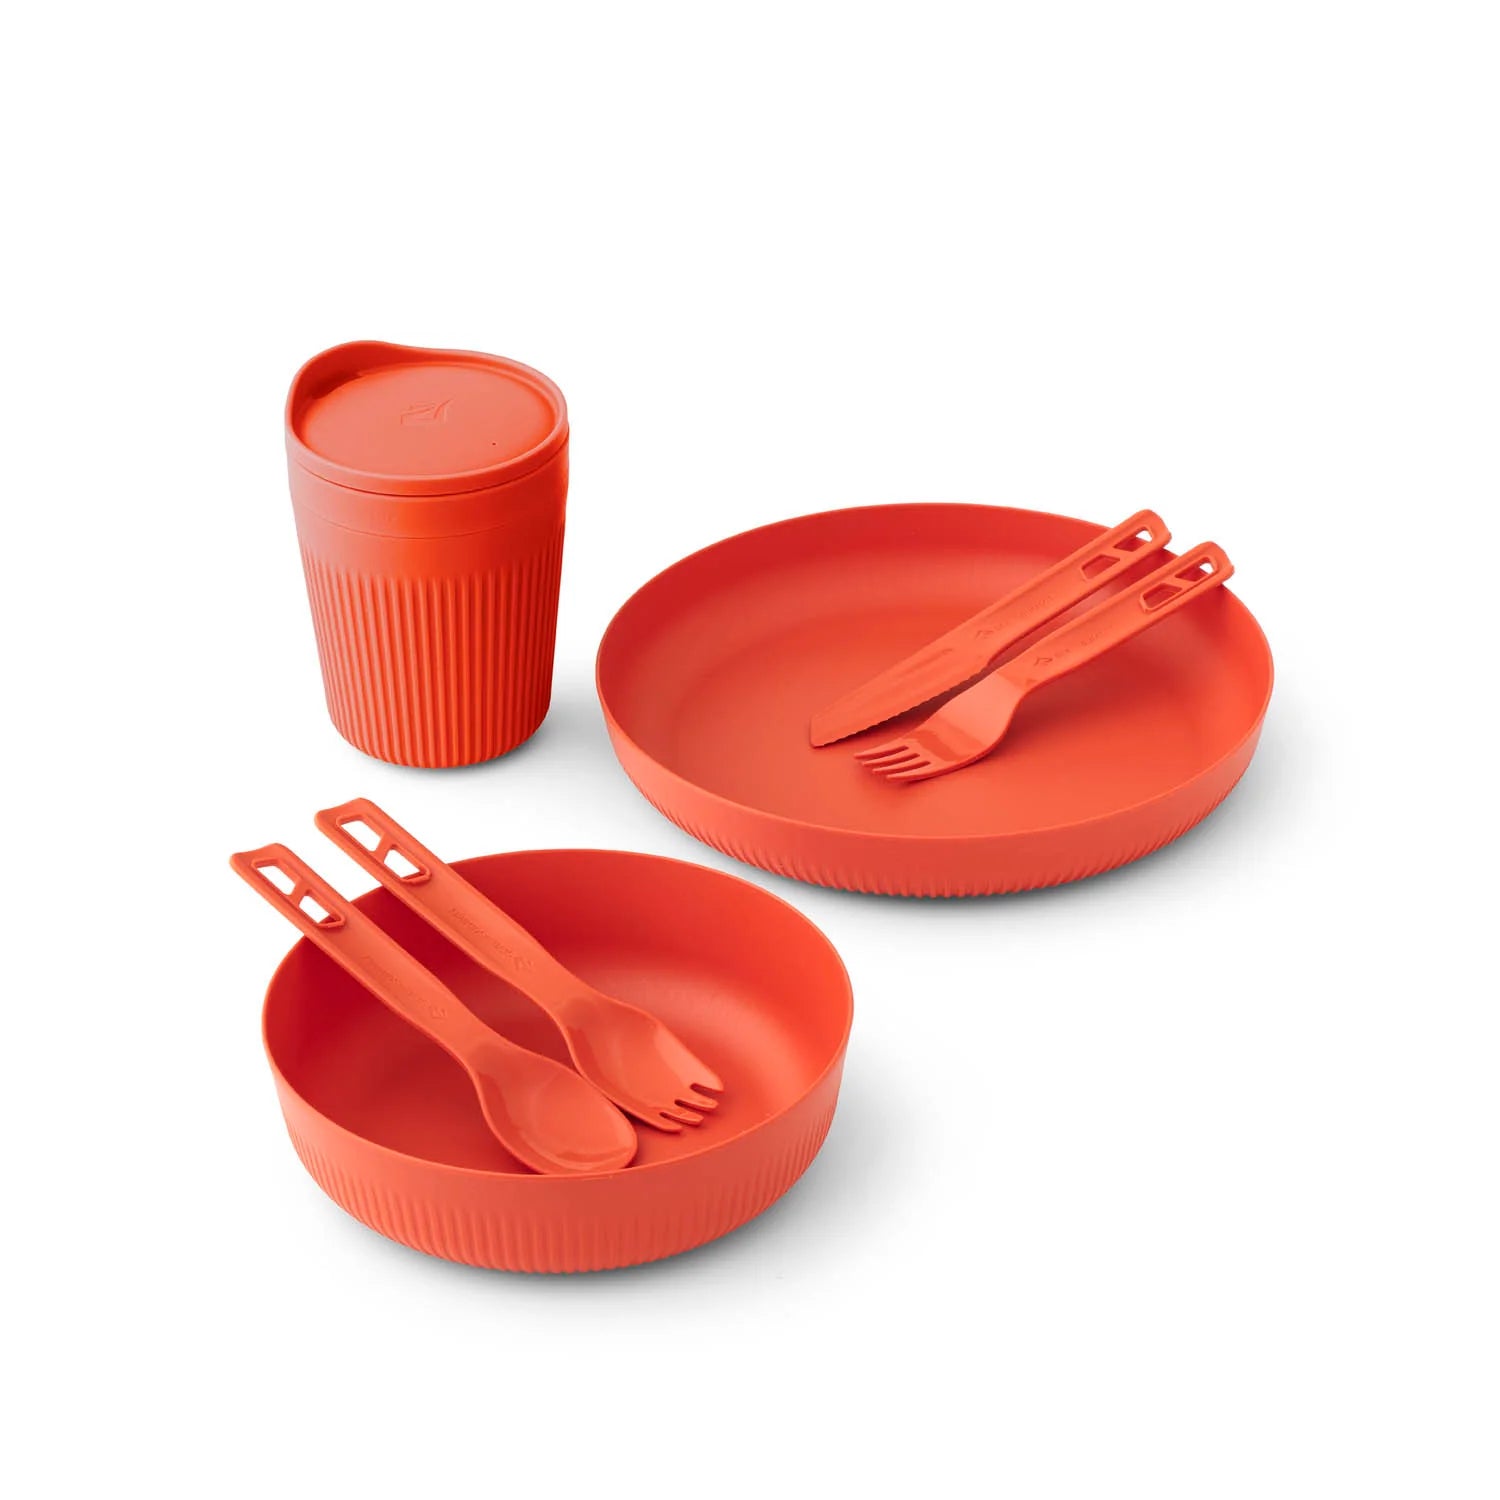 Sea to Summit Passage Dinner Set for 1 Person - 7 Piece - ORANGE - Mansfield Hunting & Fishing - Products to prepare for Corona Virus